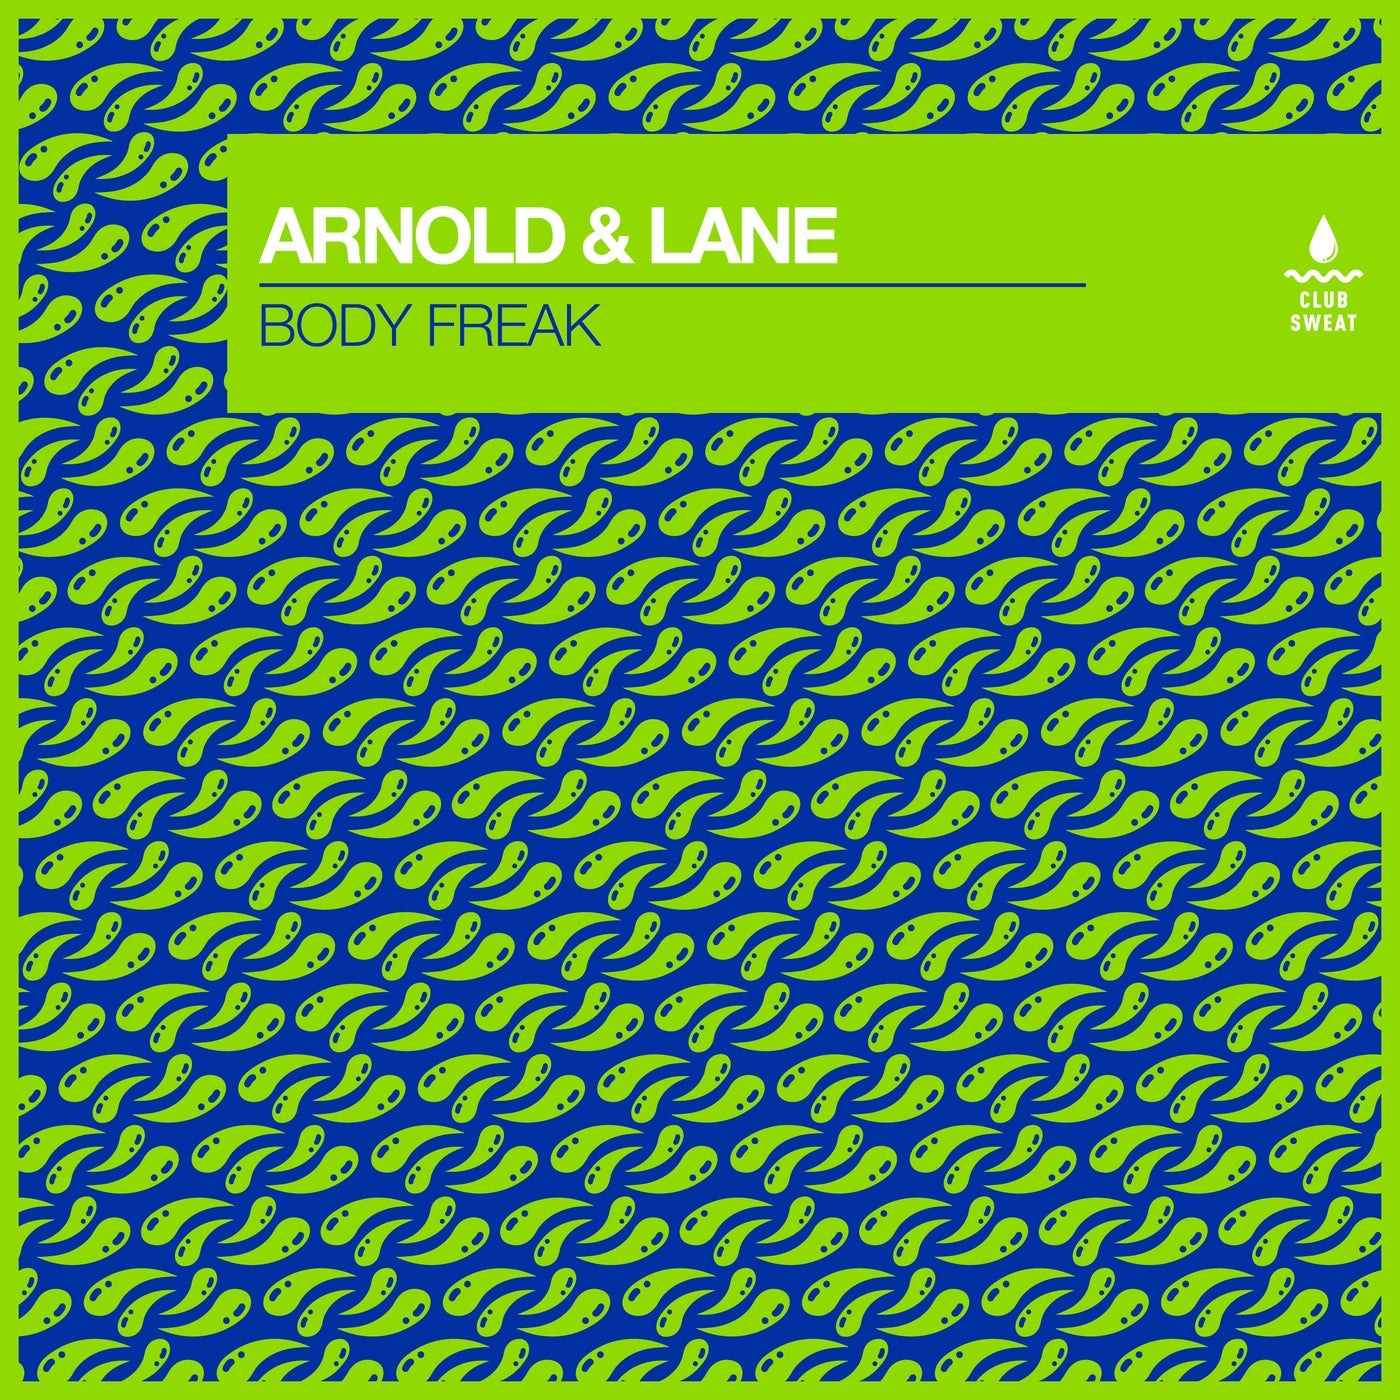 image cover: Arnold & Lane - Body Freak (Extended Mix) on Club Sweat